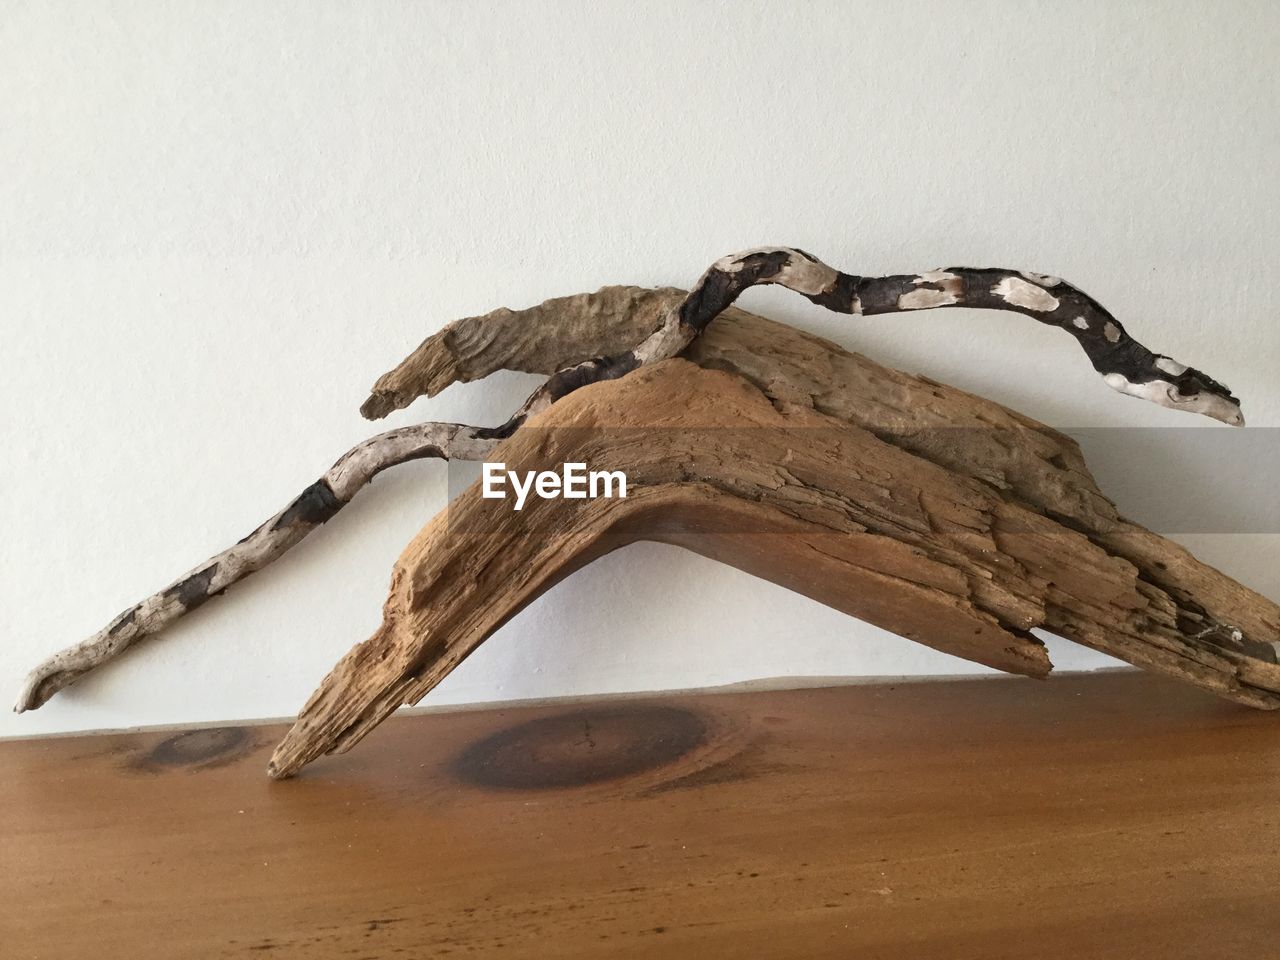 VIEW OF DRIFTWOOD ON SAND